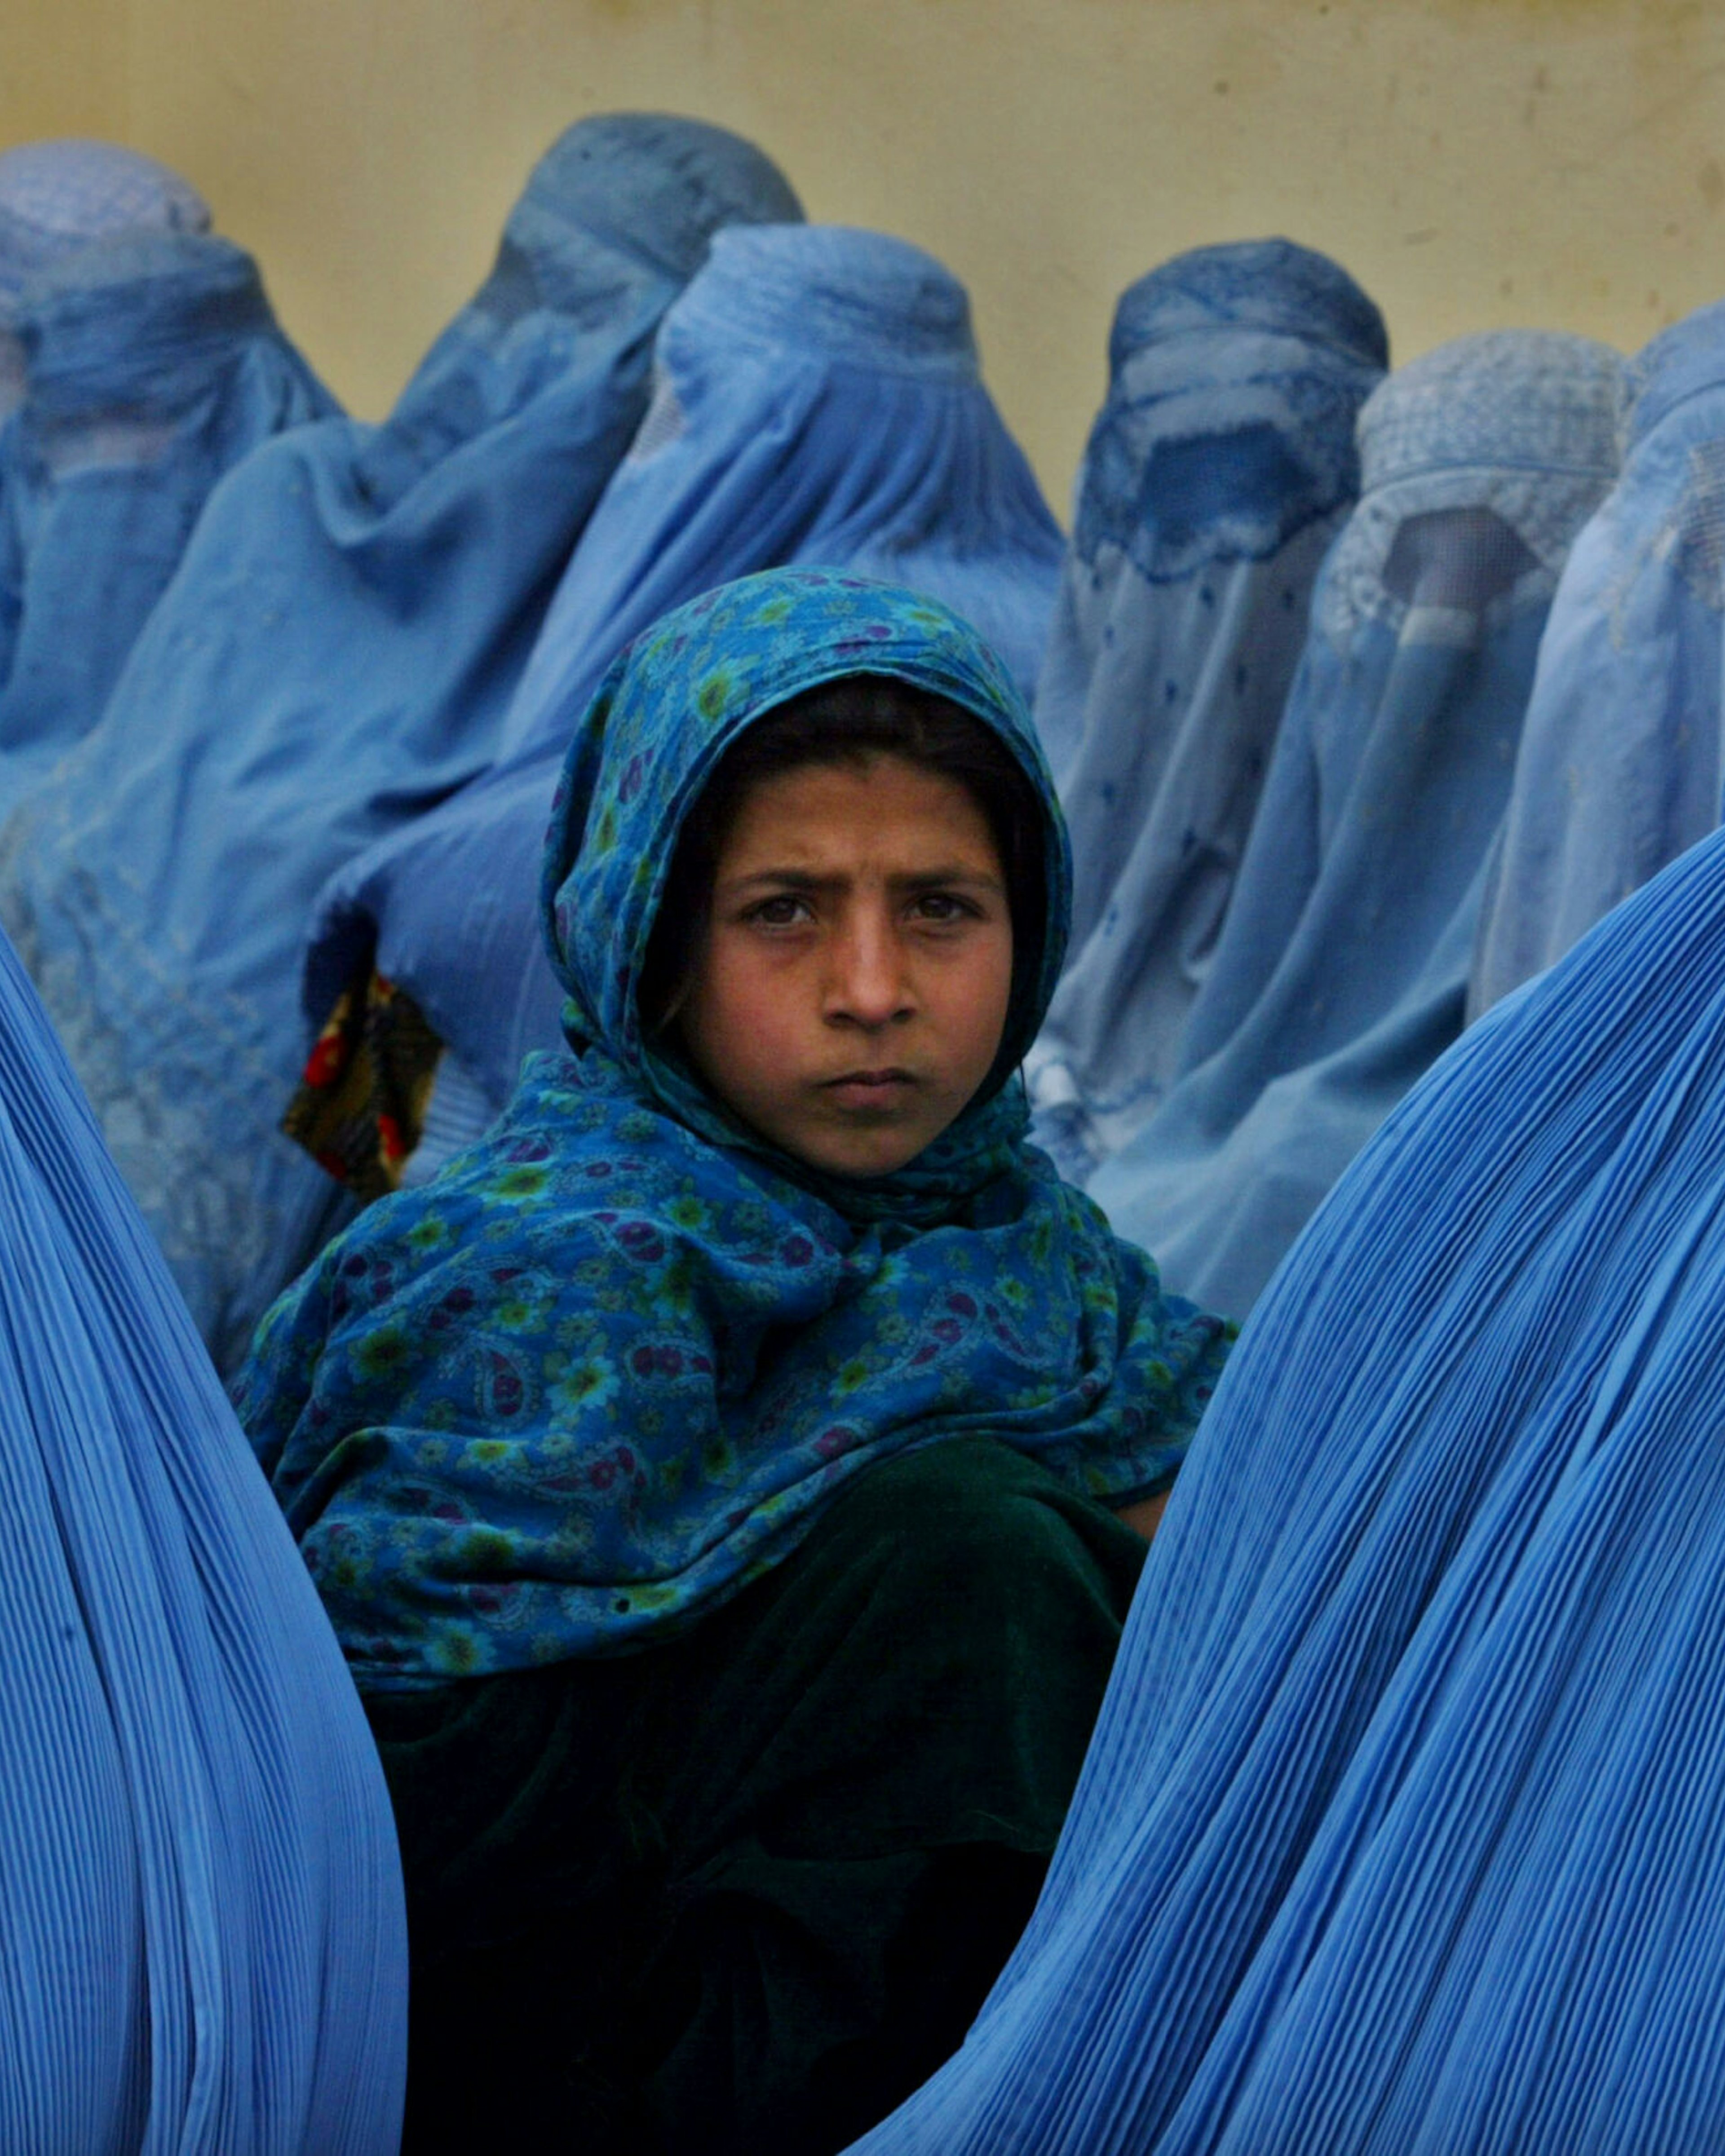 KALAKAN, AFGHANISTAN - FEBRUARY 23: Afghan women wait in line to be treated at the Kalakan health clinic February 23,2003 in Kalakan, Afghanistan. (Photo by Paula Bronstein/Getty Images)